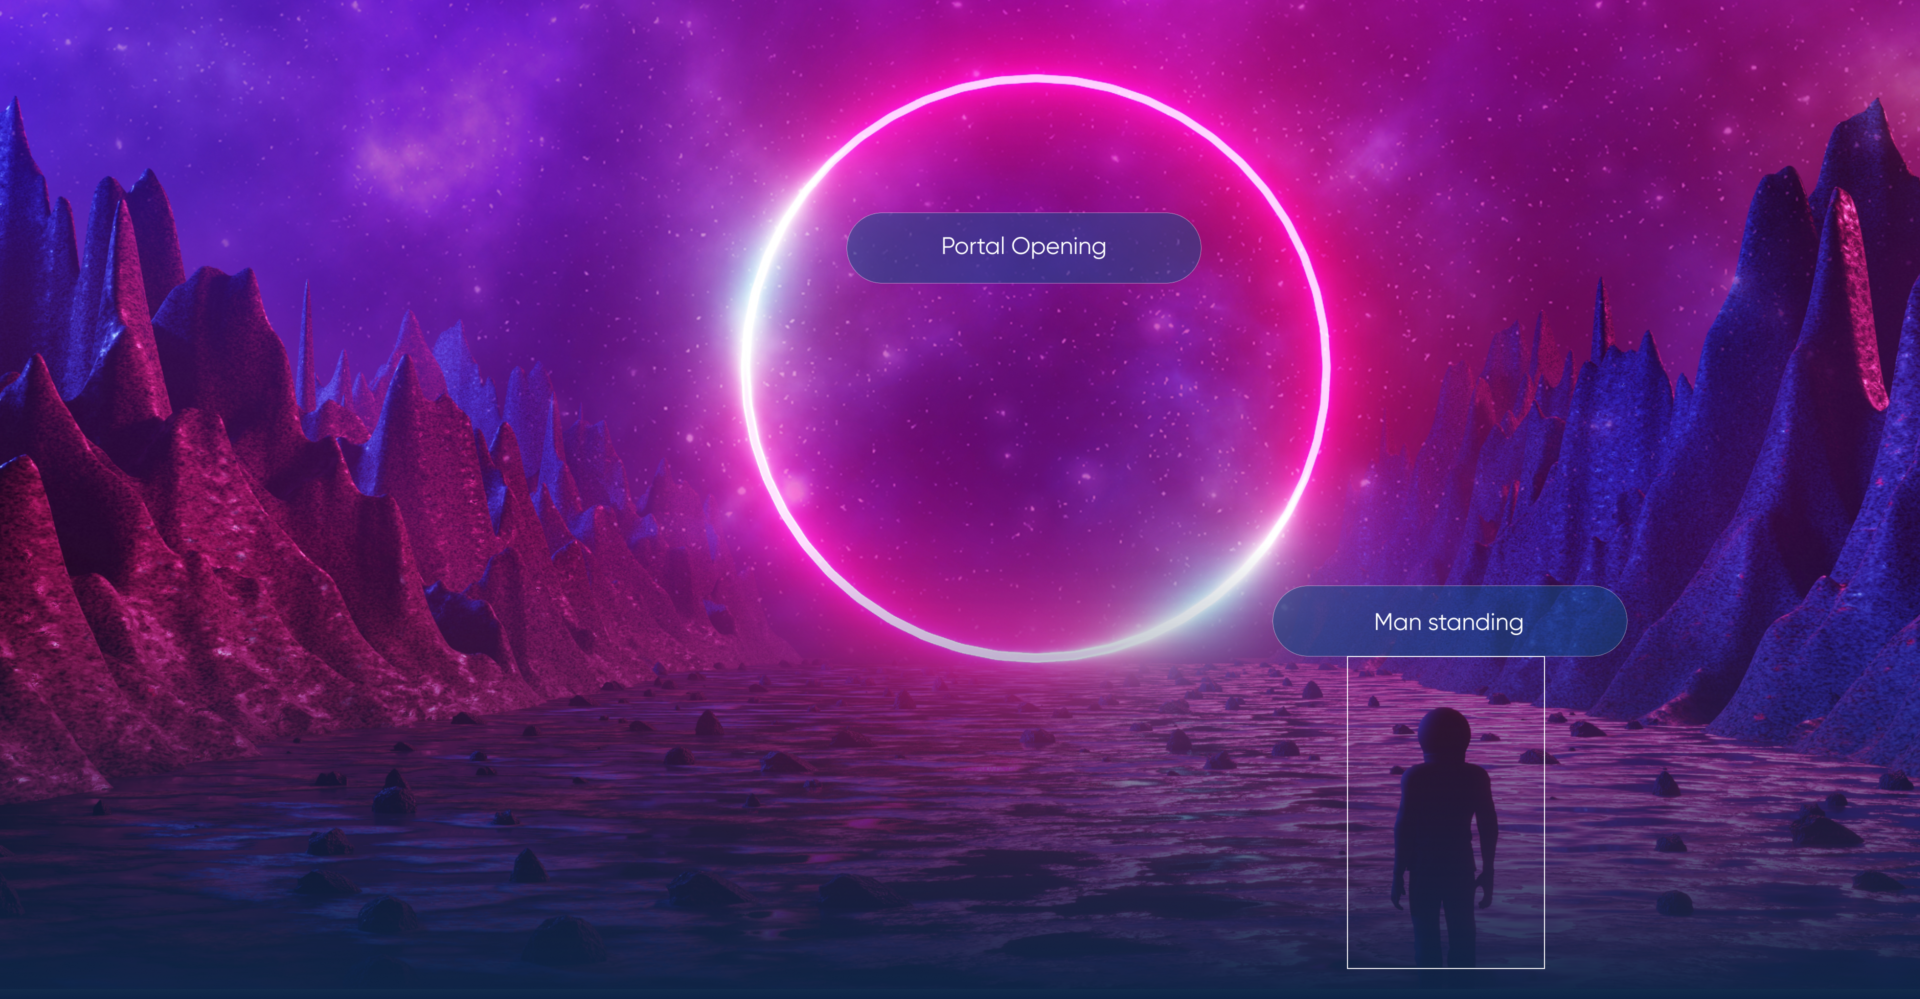 The image shows a man standing before an illuminated portal on an alien planet with objects being labeled using data labeling services.